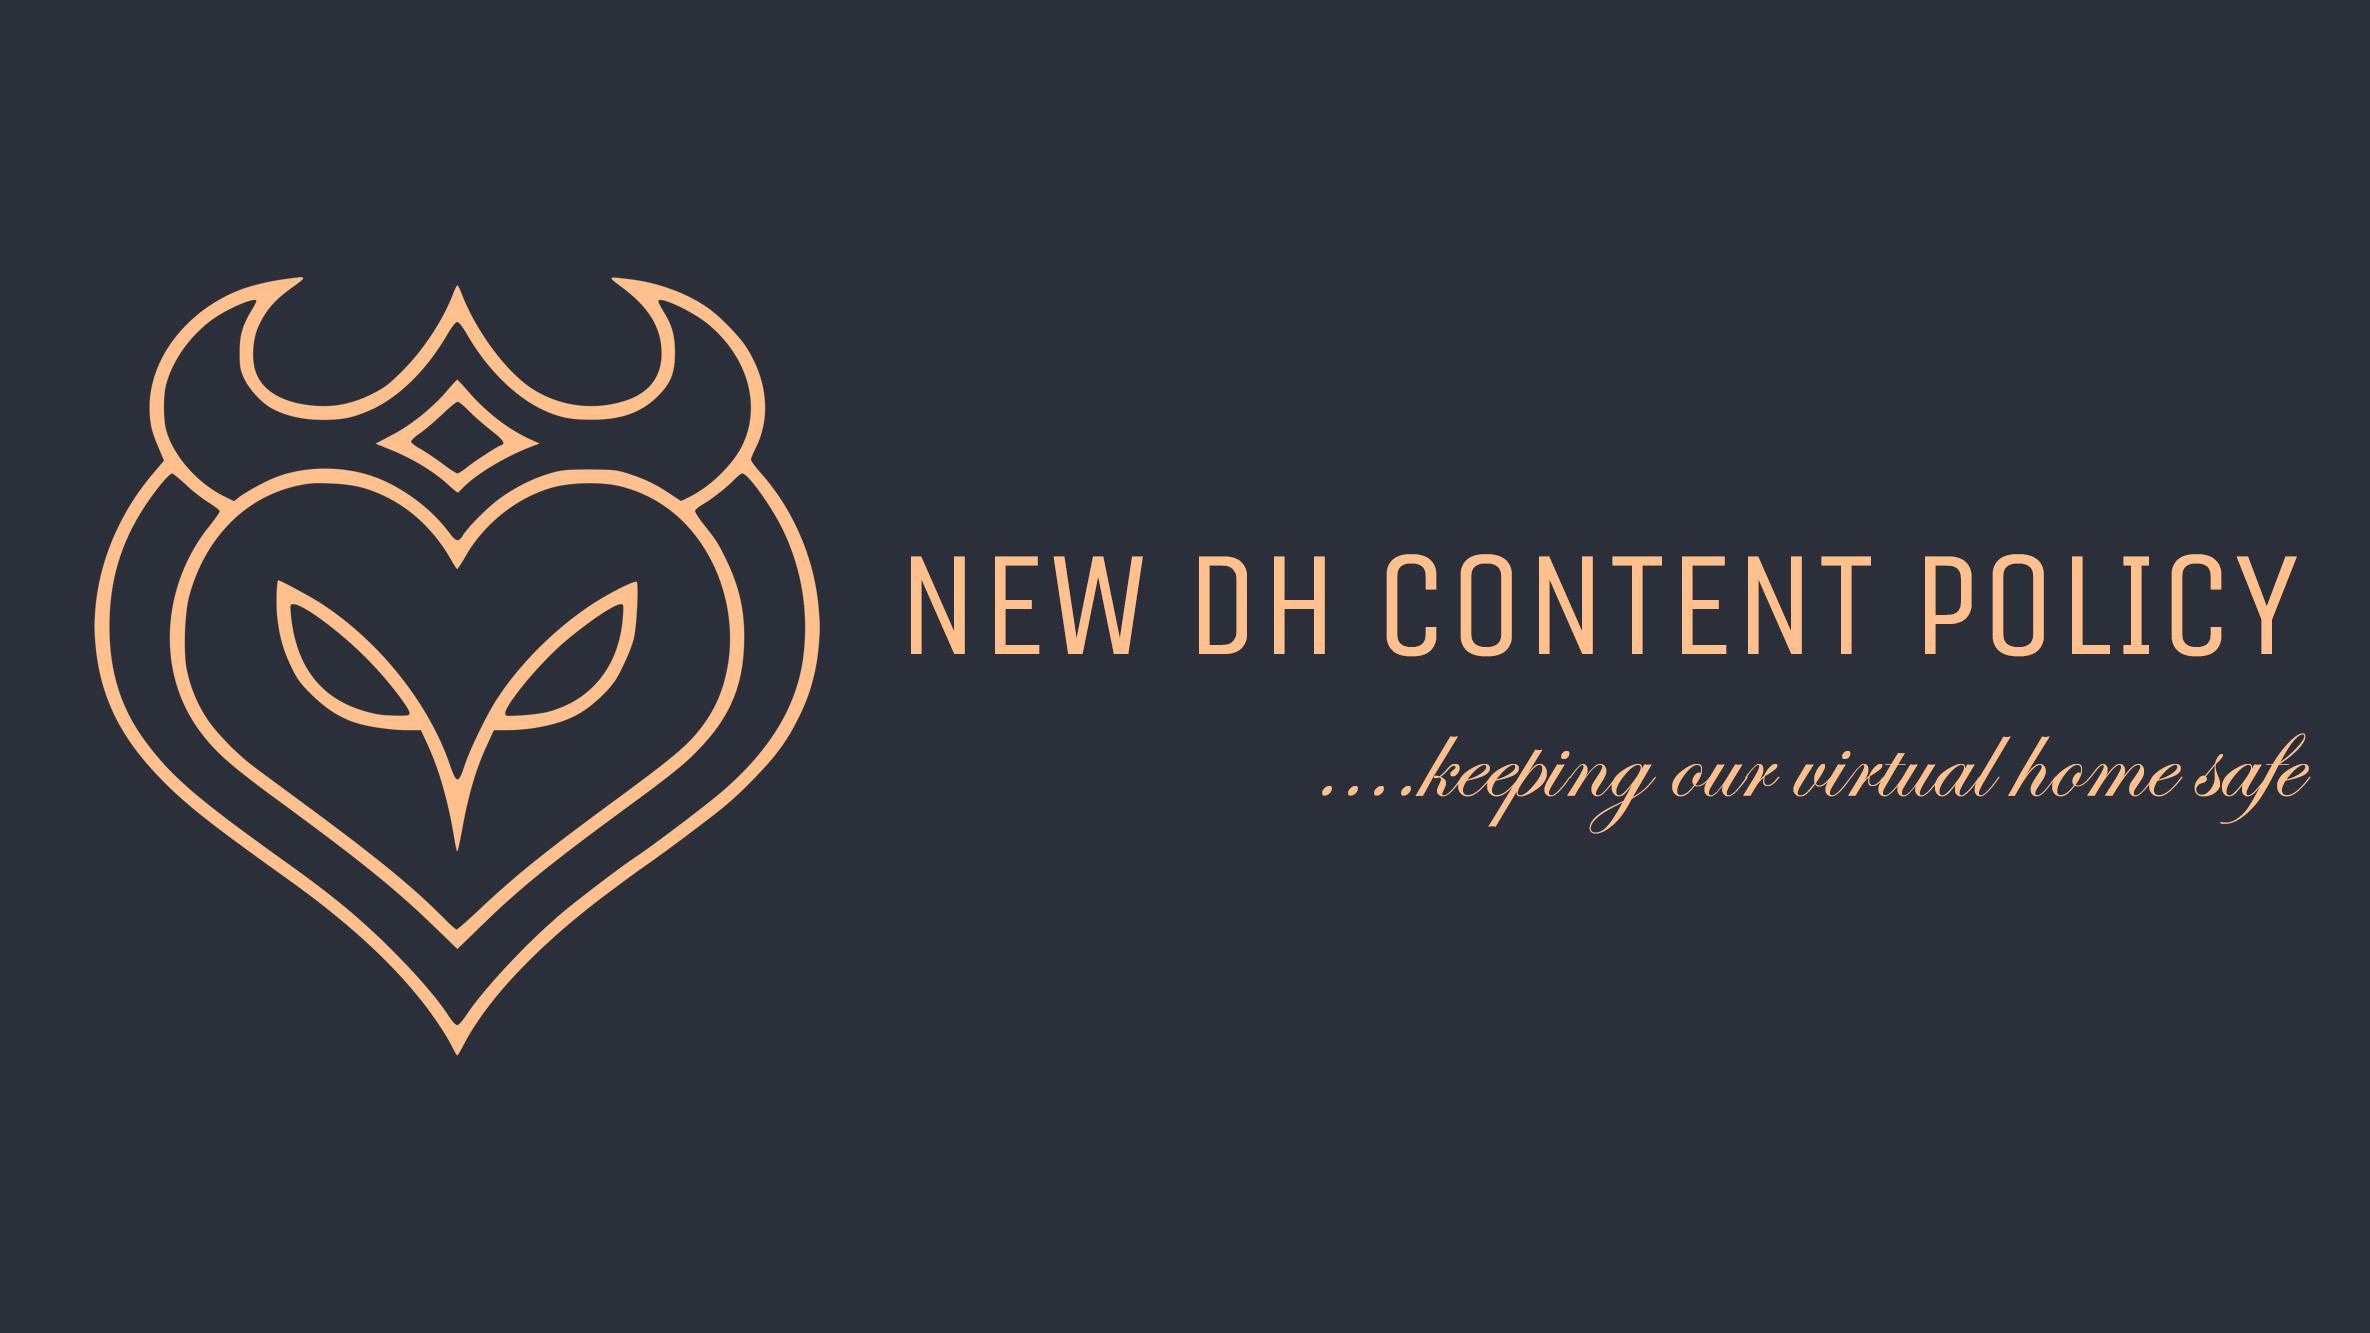 New DH Content Policy